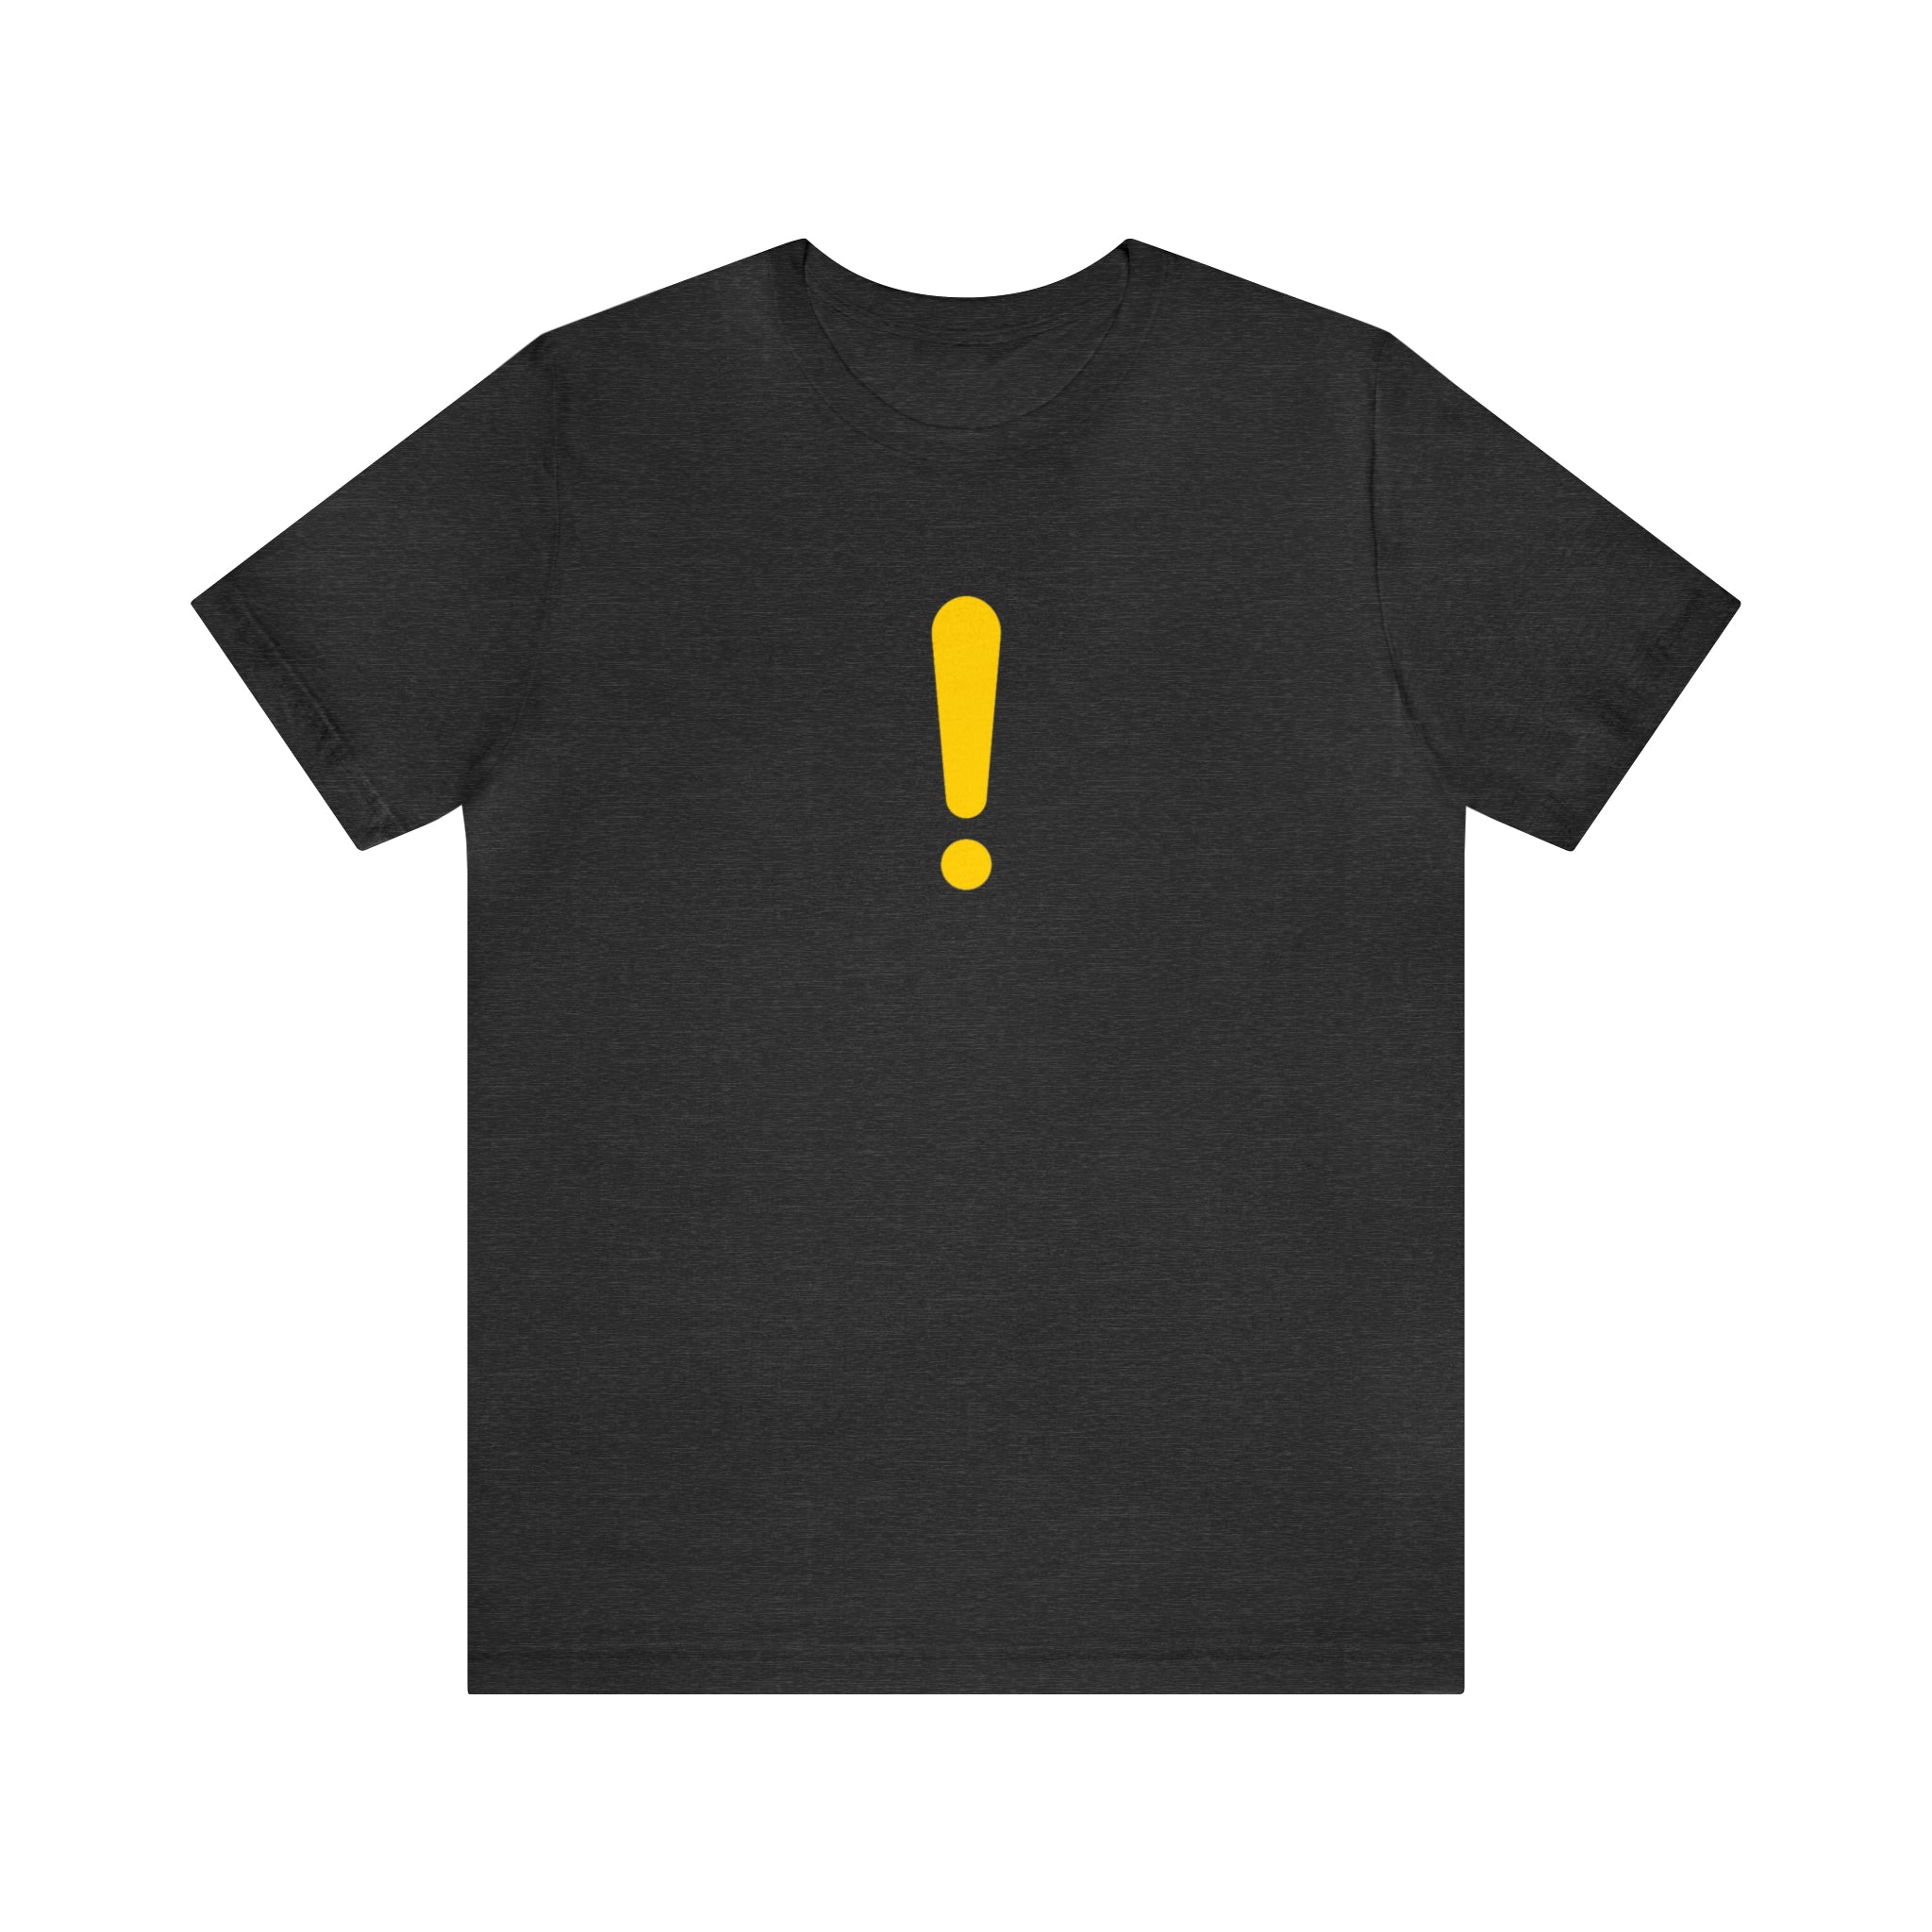 Yellow Exclamation T-Shirt | Gift for Gamers, Gamer Shirt, Nerdy Gifts, Video Gamer T-Shirt